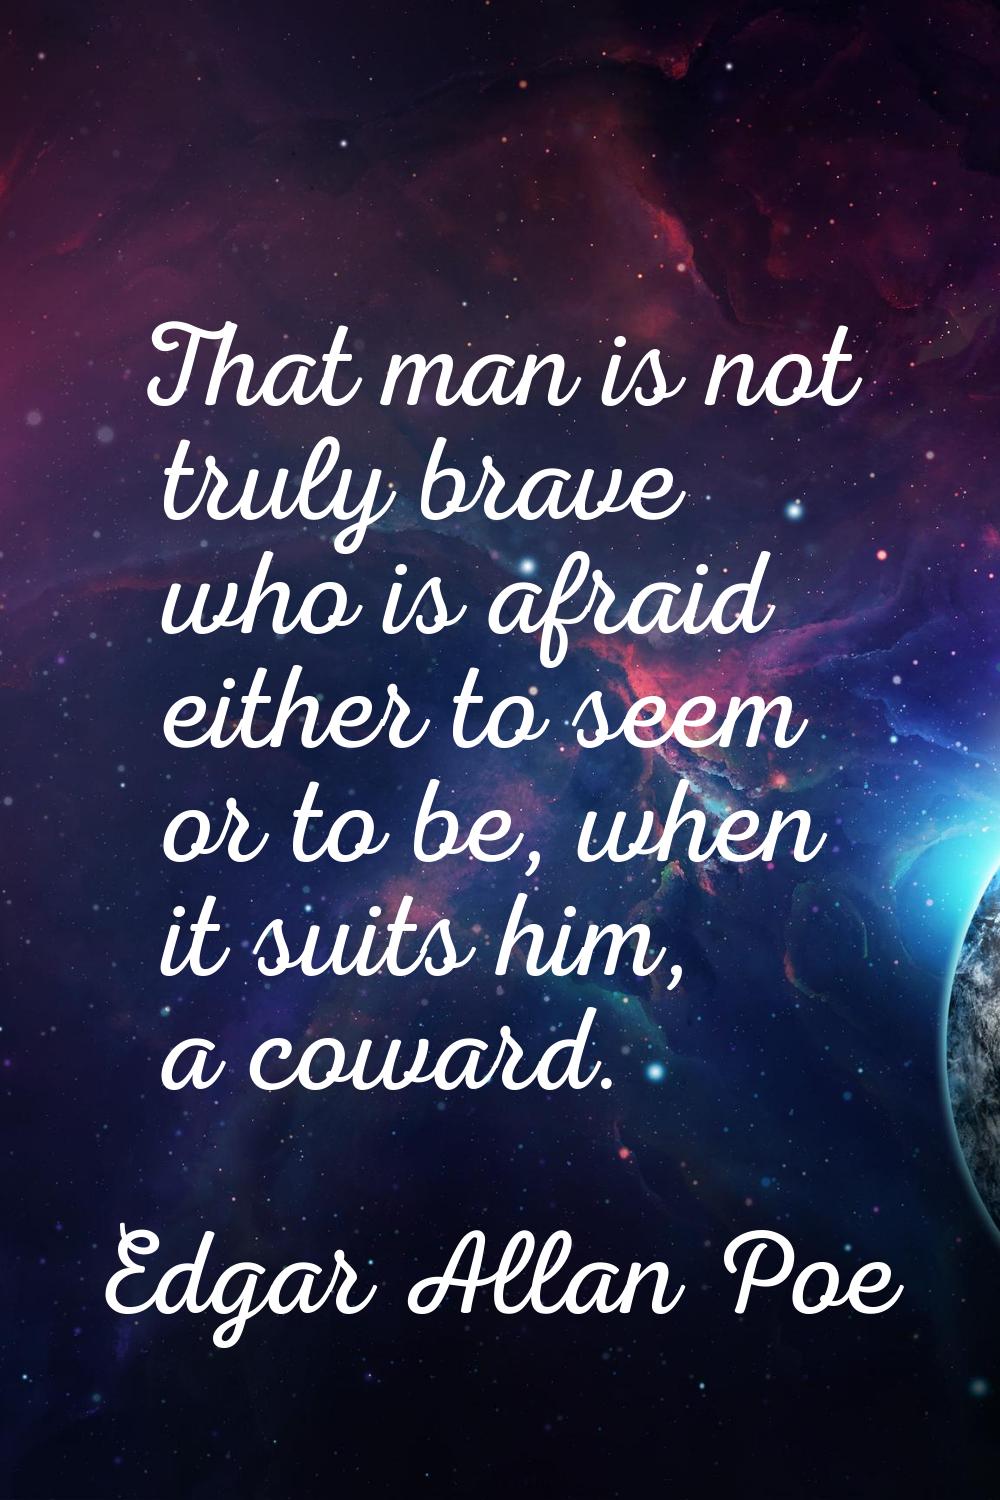 That man is not truly brave who is afraid either to seem or to be, when it suits him, a coward.